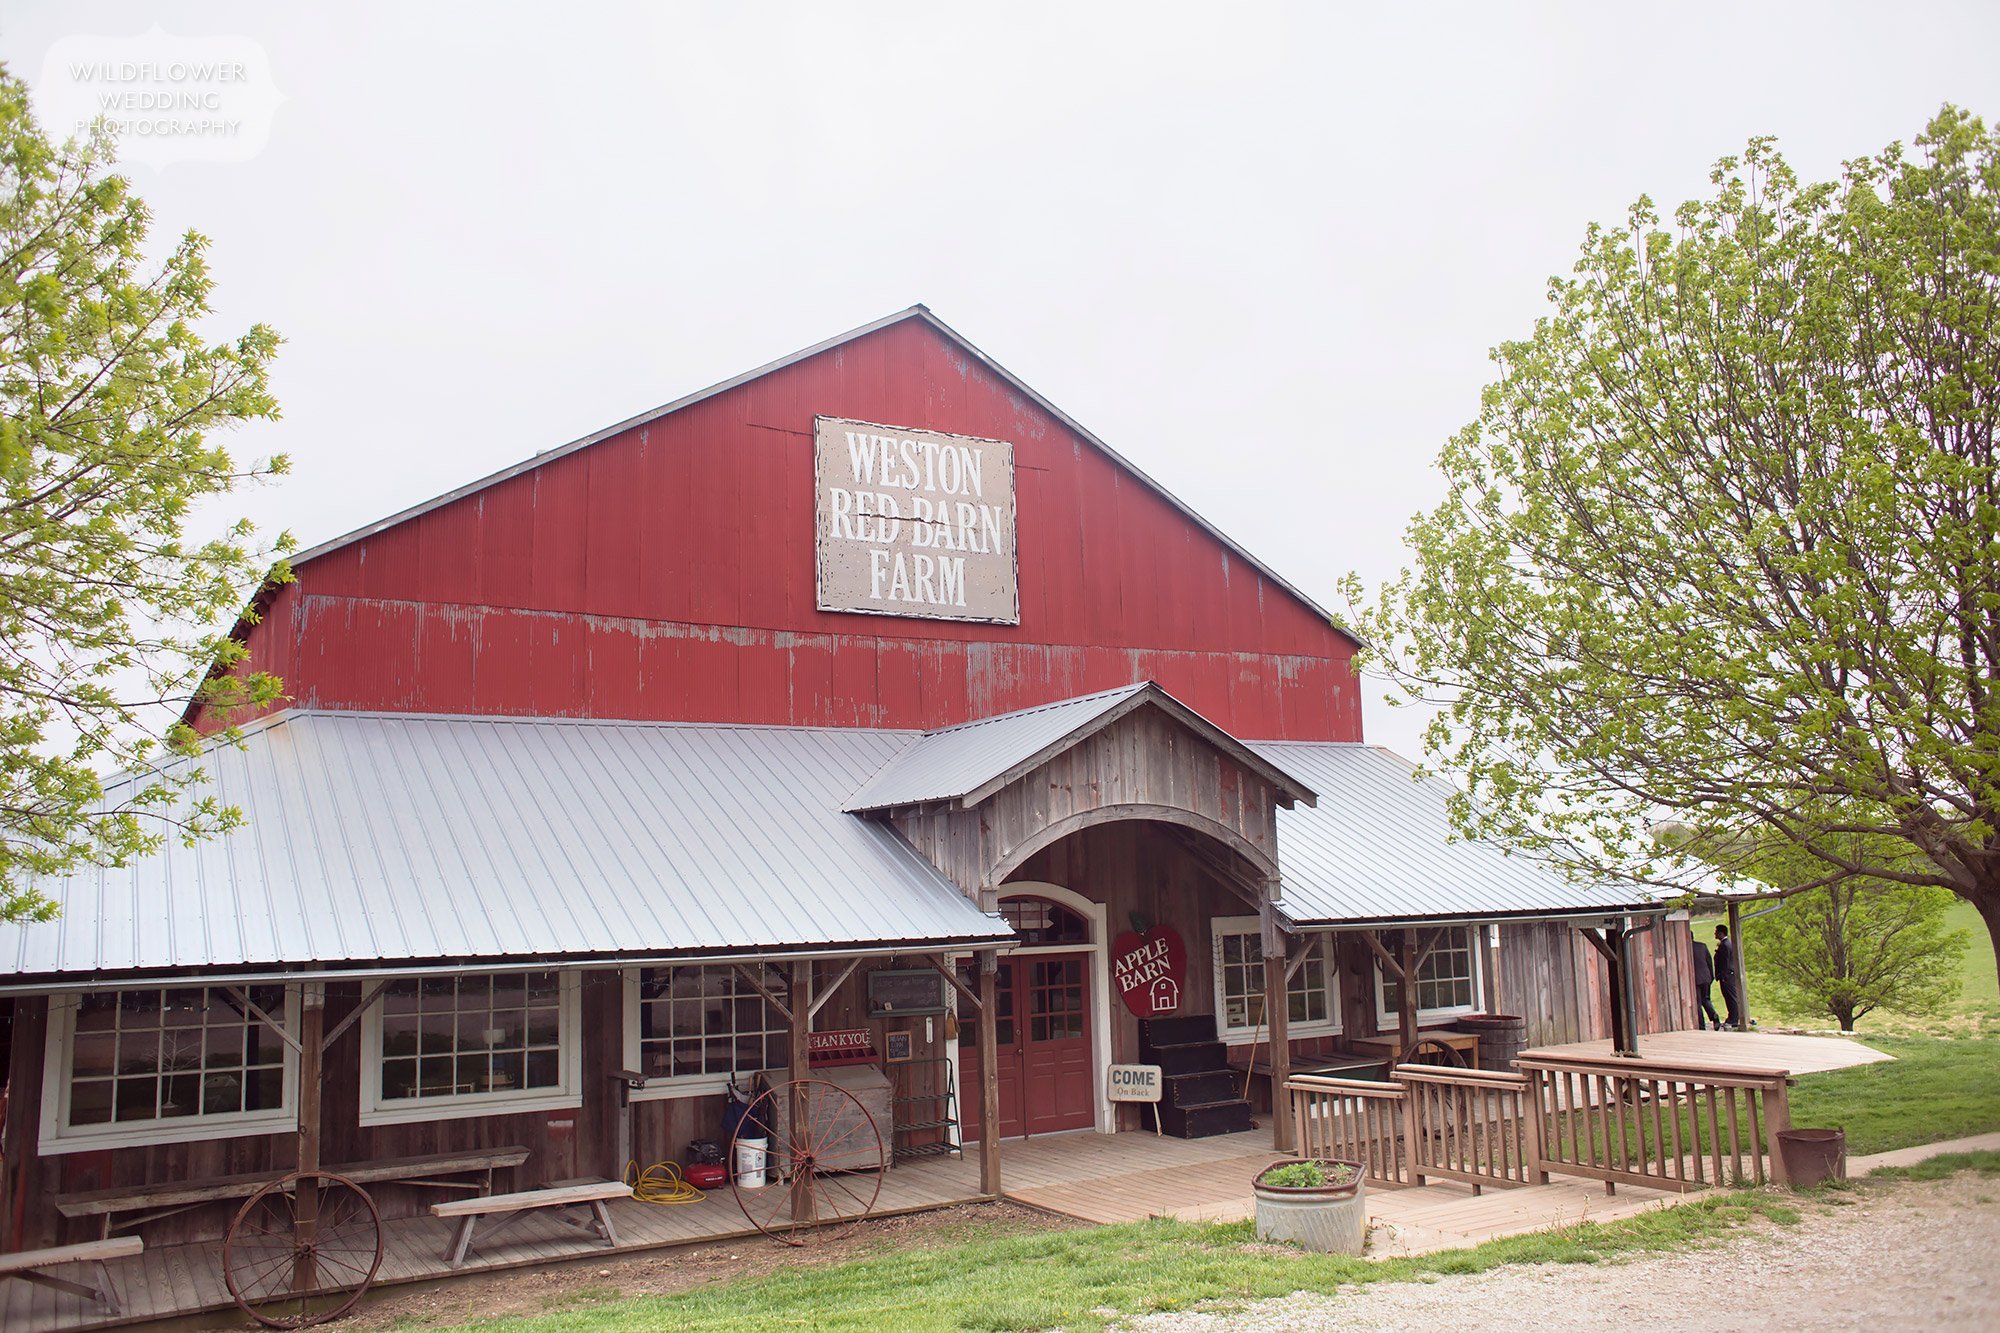 View of the Weston Red Barn Farm store, a rustic wedding venue just north of Kansas City, MO.